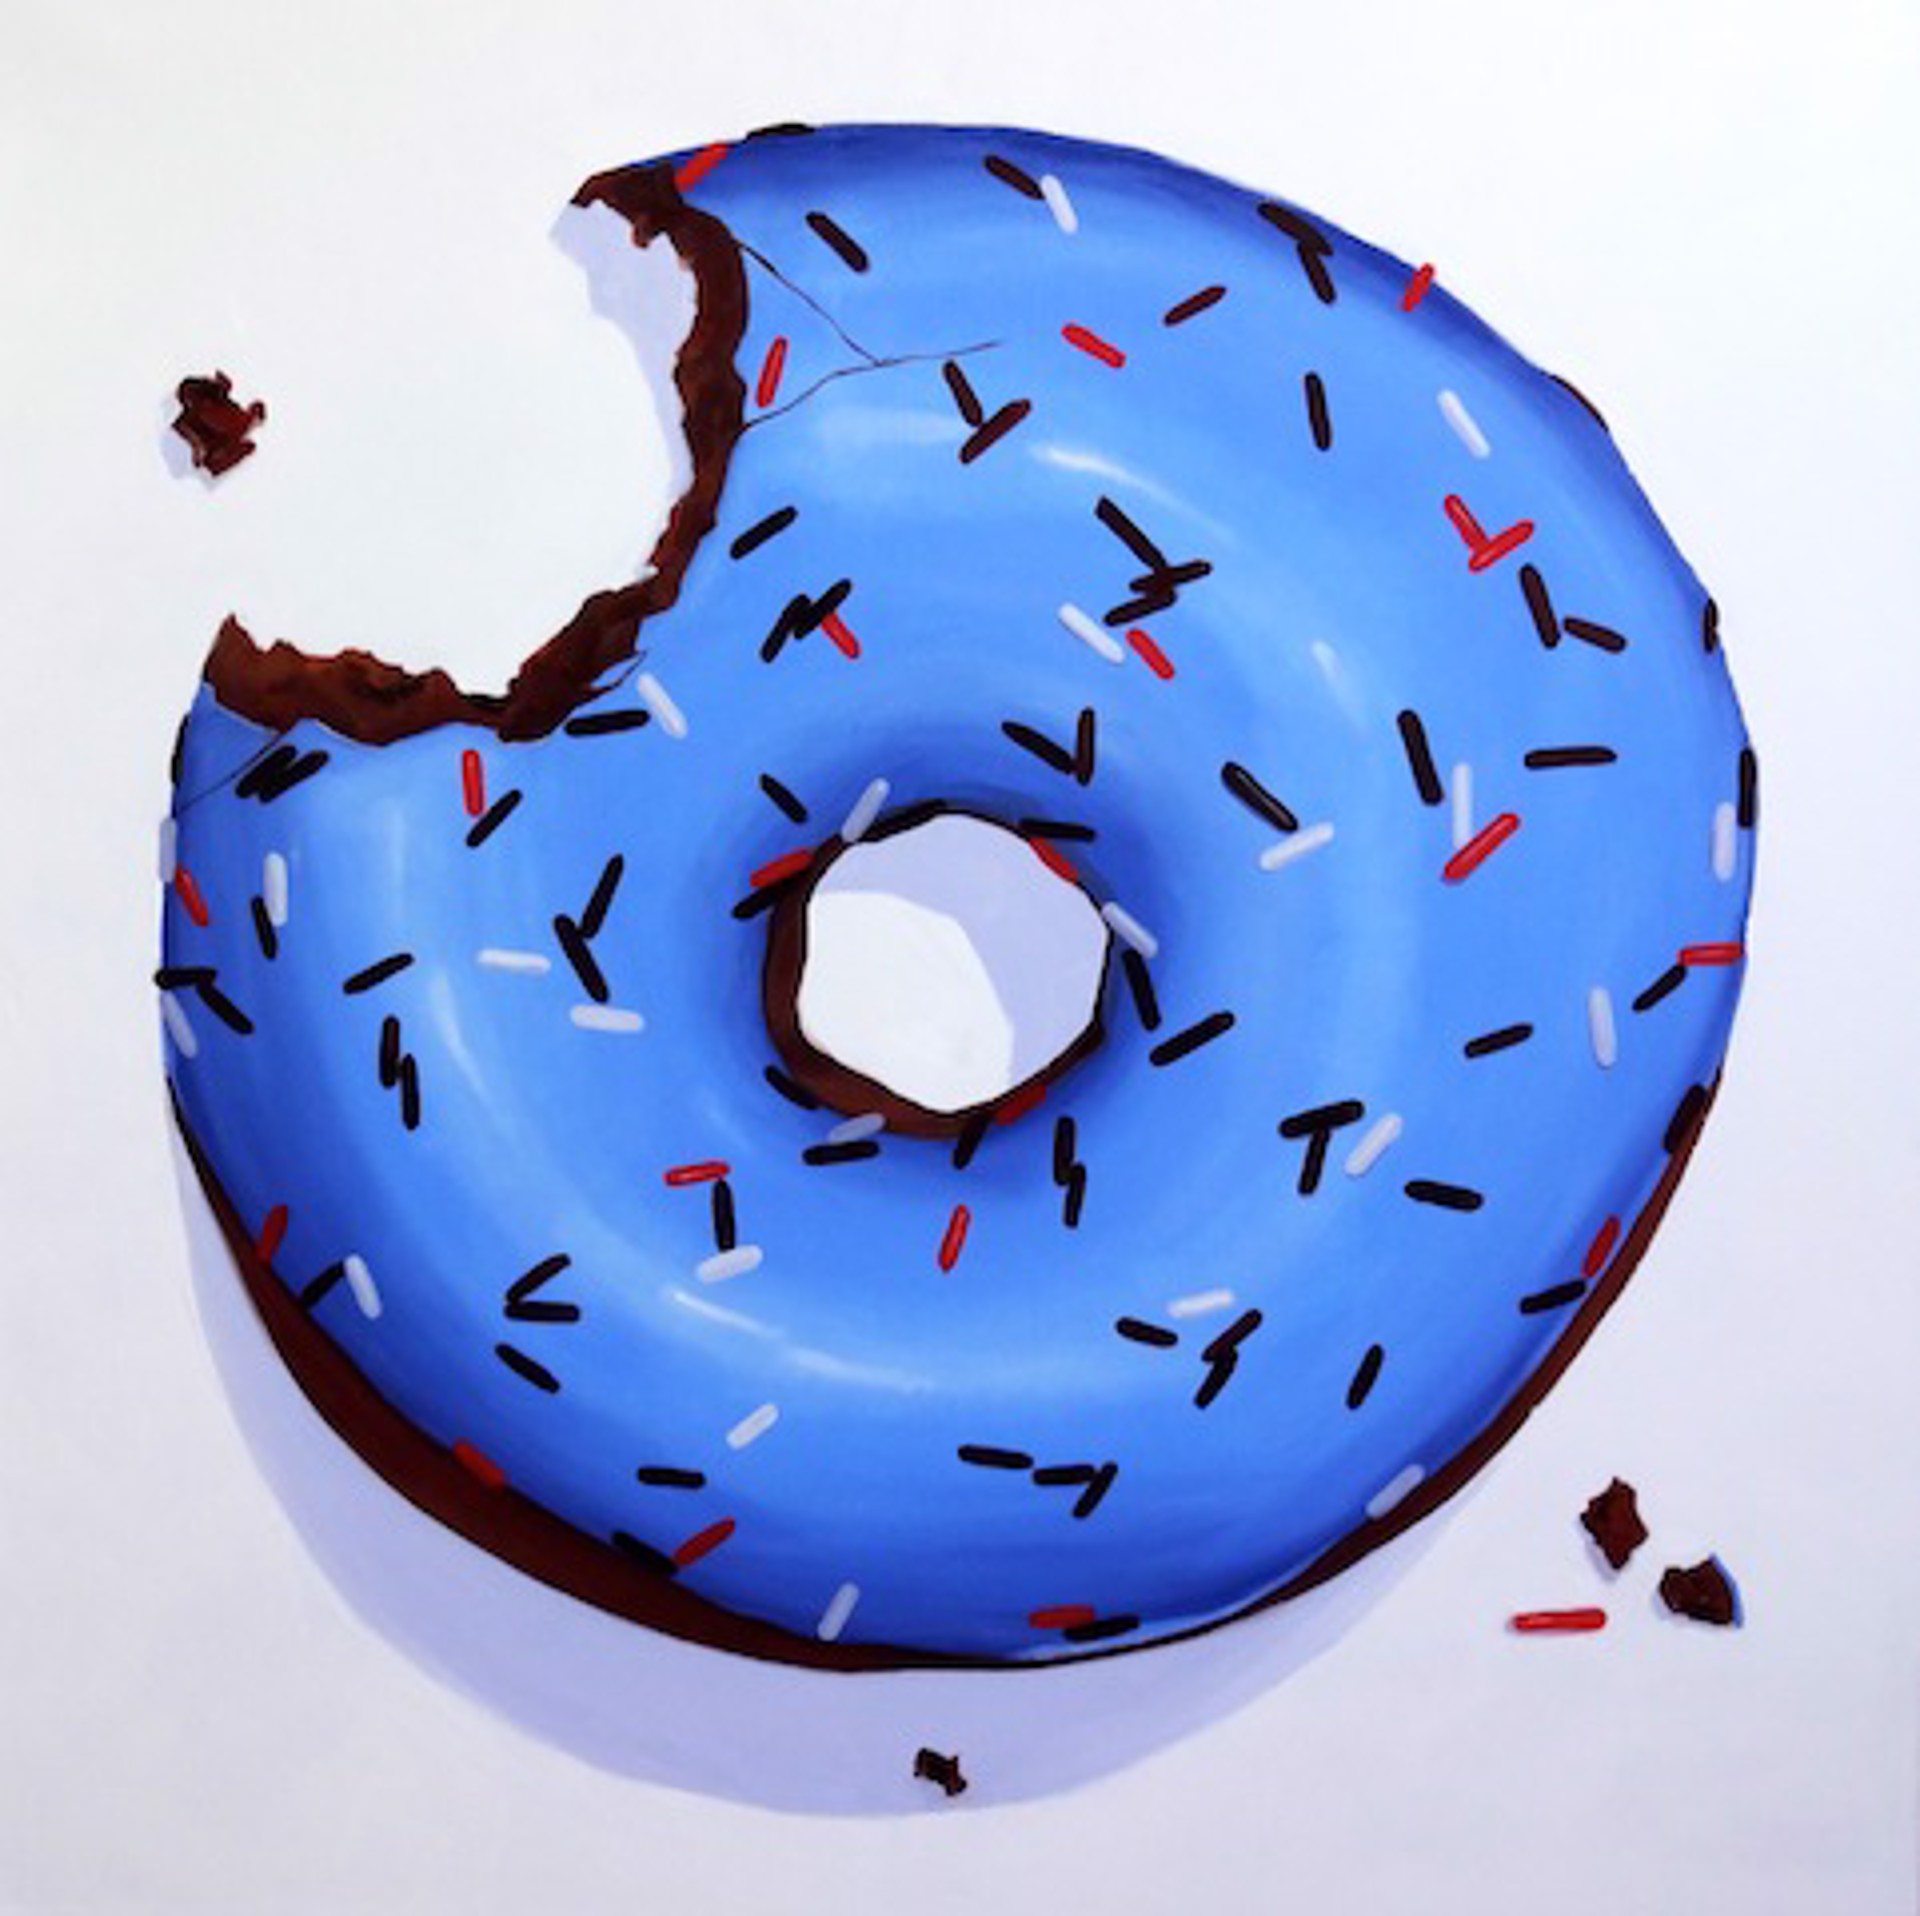 Blue Donut With Red, White and Chocolate Sprinkles by Terry Romero Paul